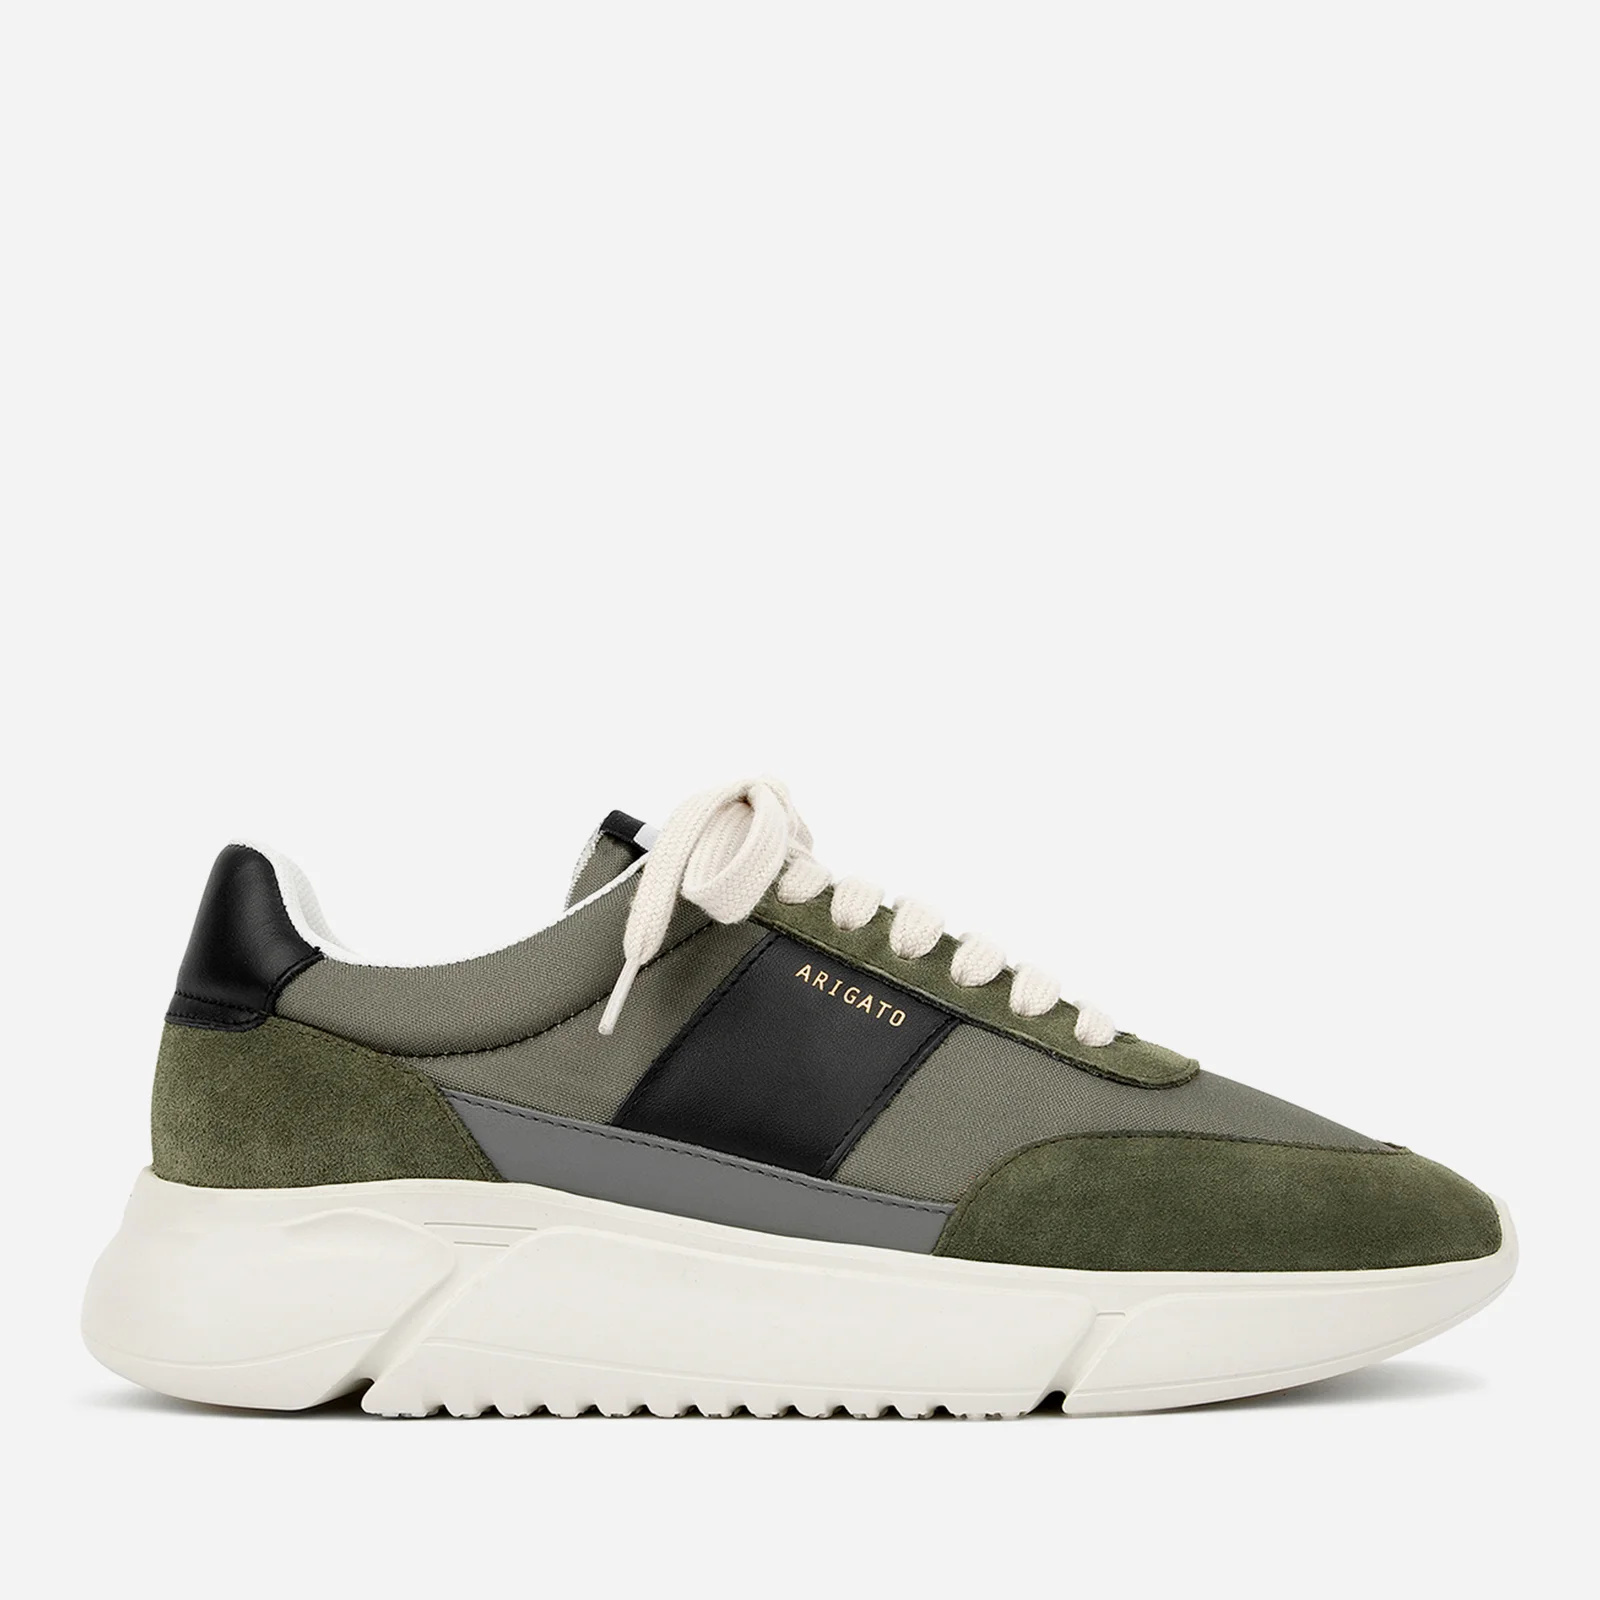 Axel Arigato Men's Genesis Vintage Leather and Suede Trainers Image 1